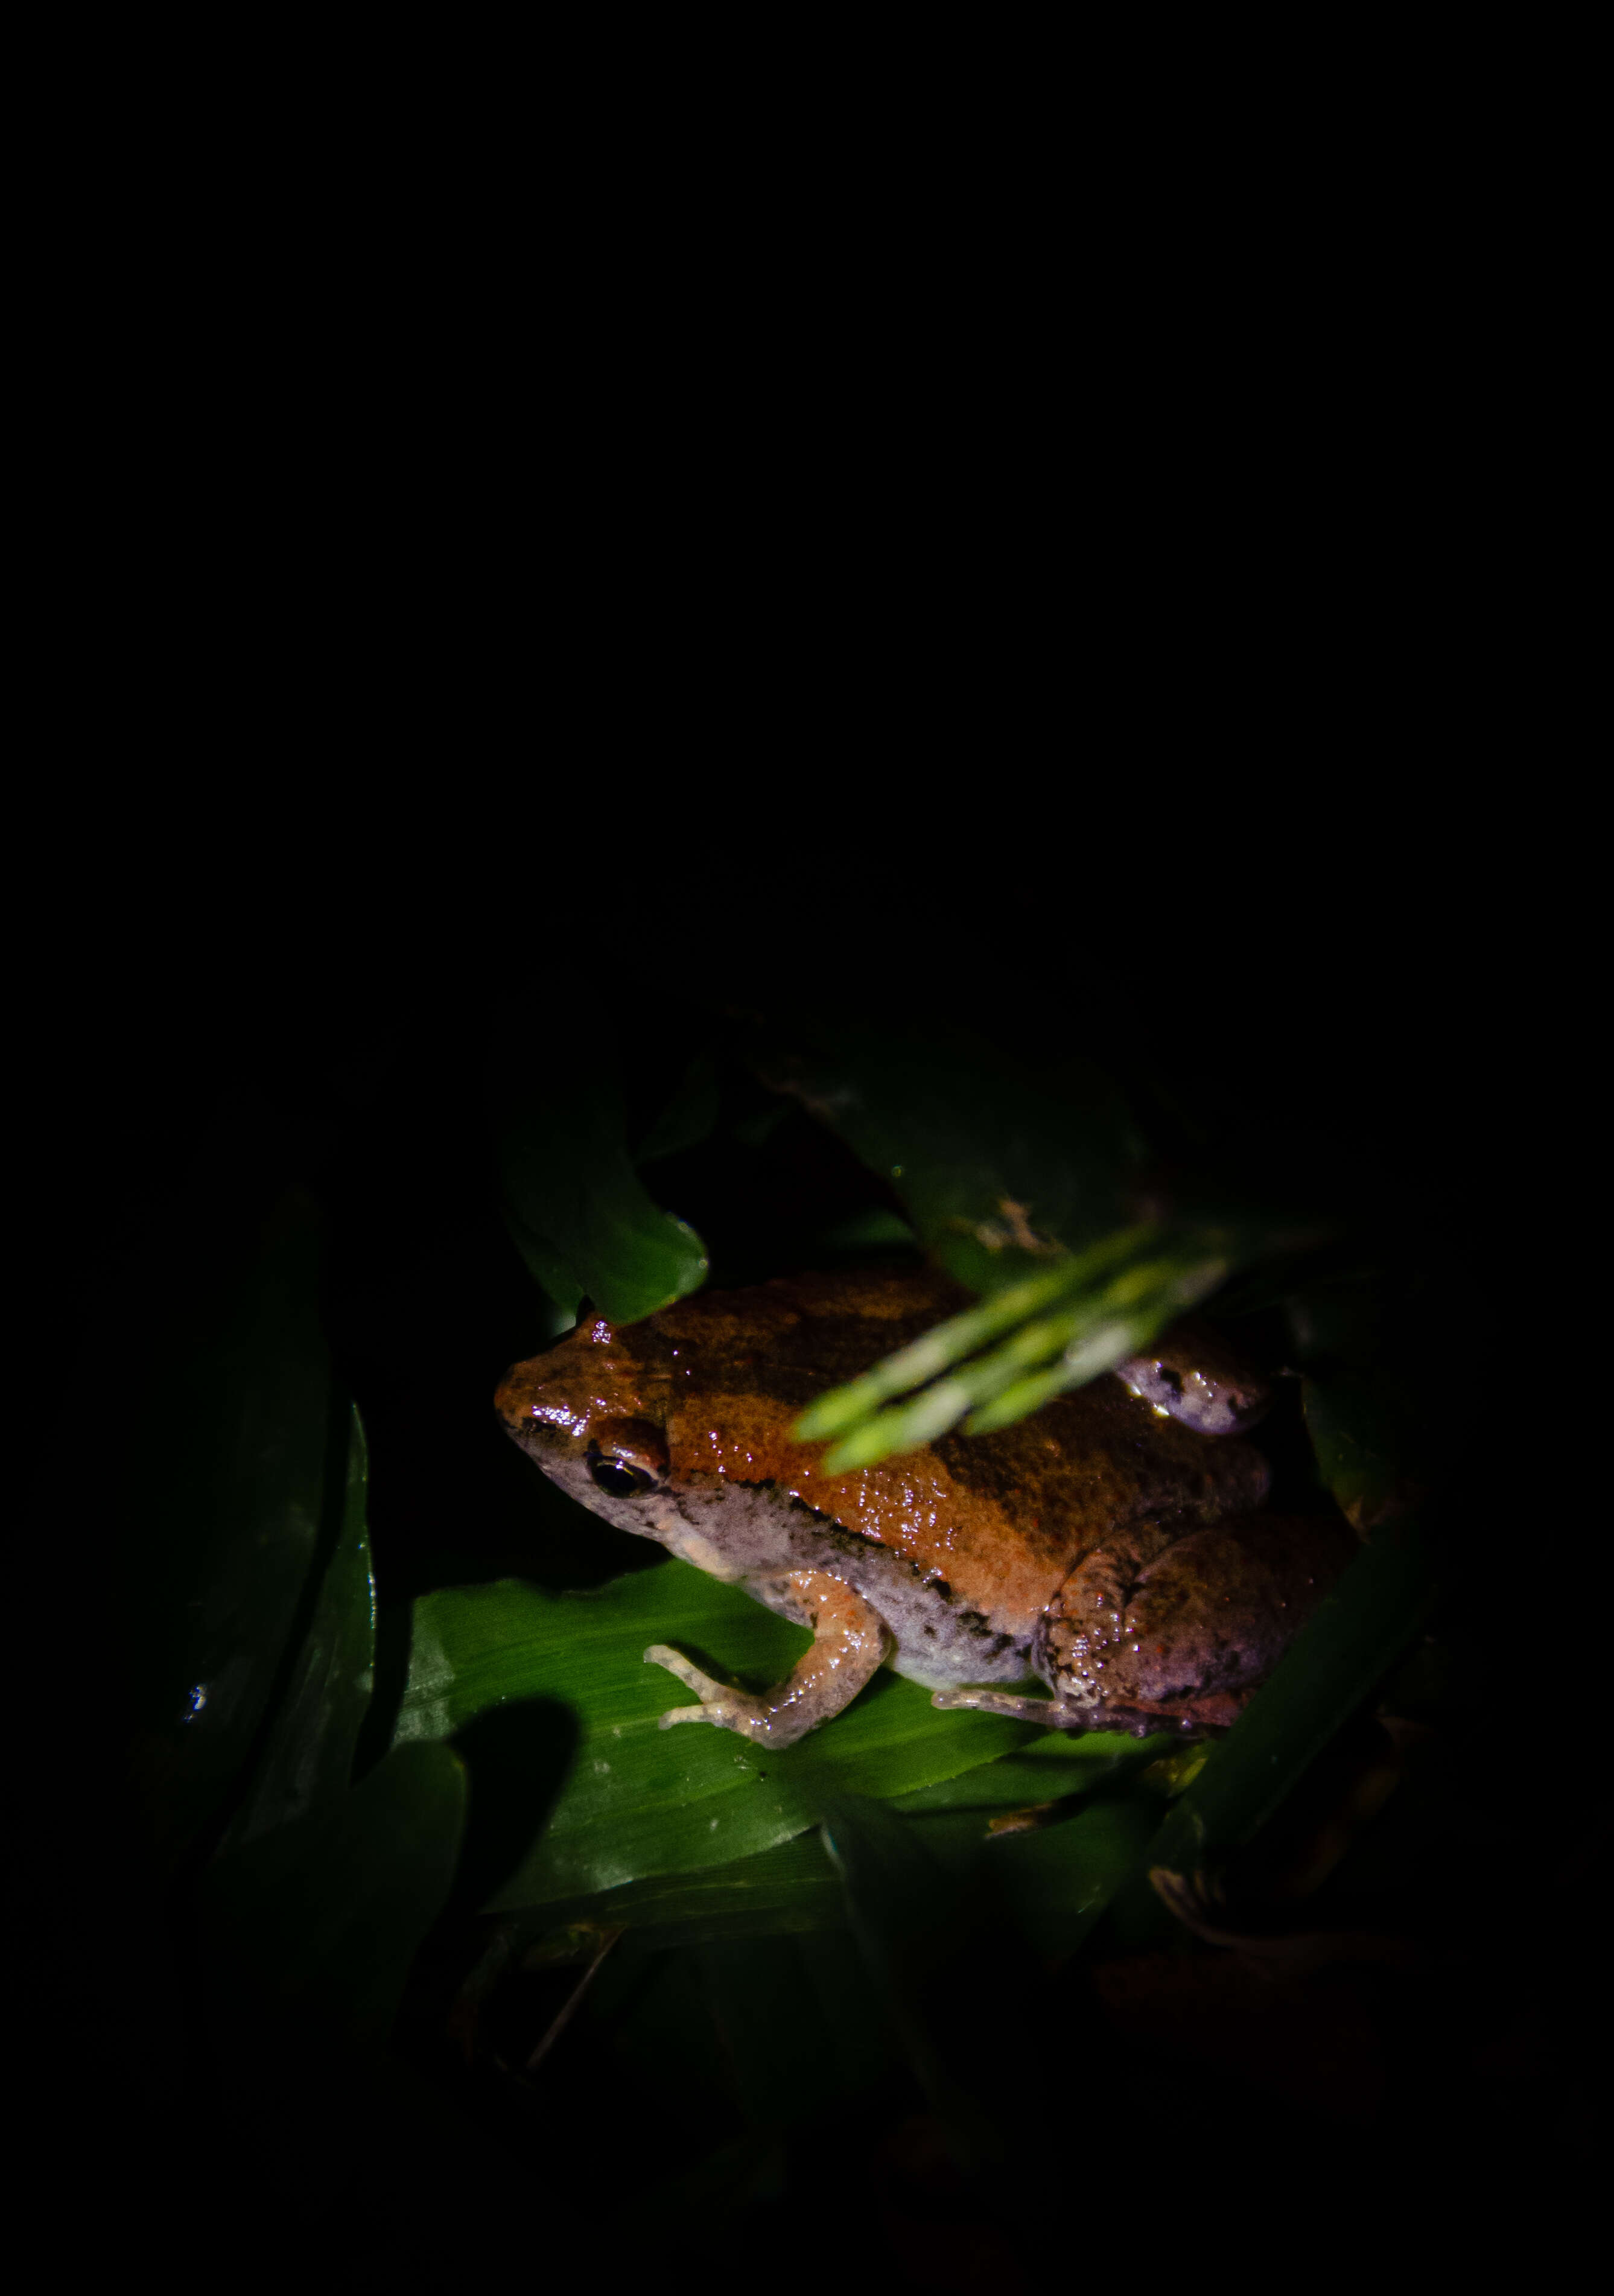 Image of Oriental Ornate Narrow-mouth Frog